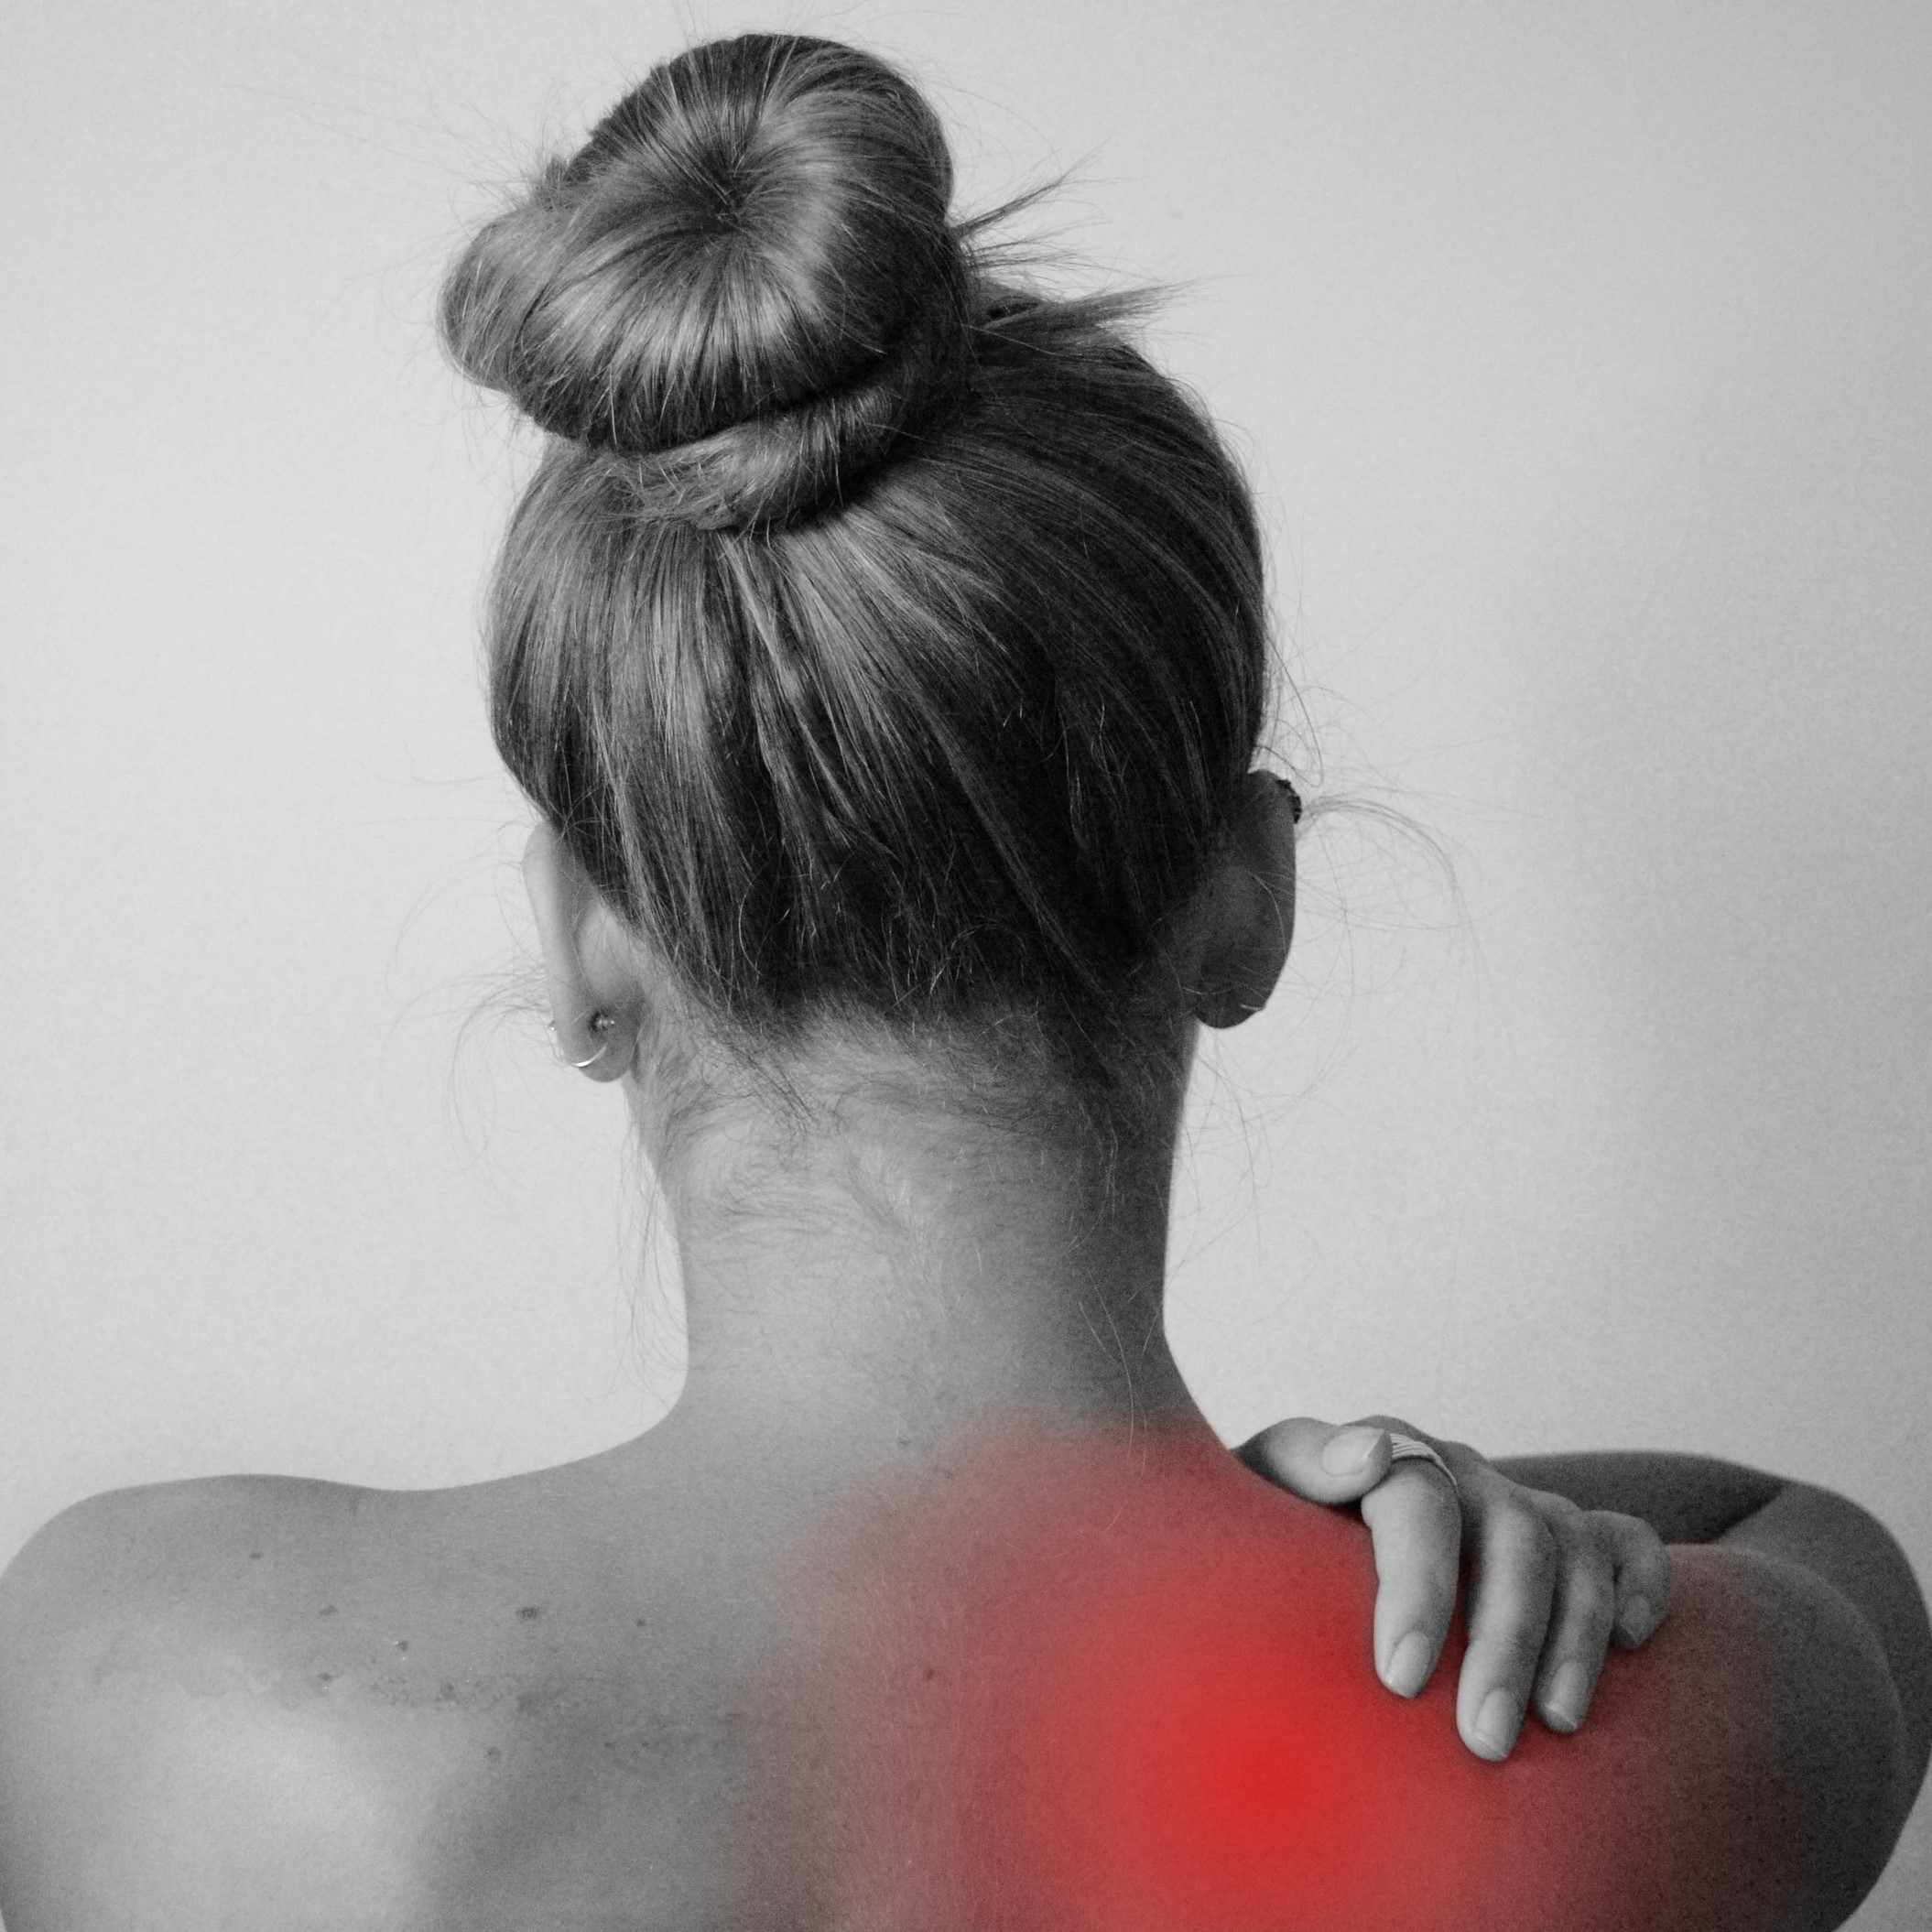 Women holding aching shoulder with pain shown in red.